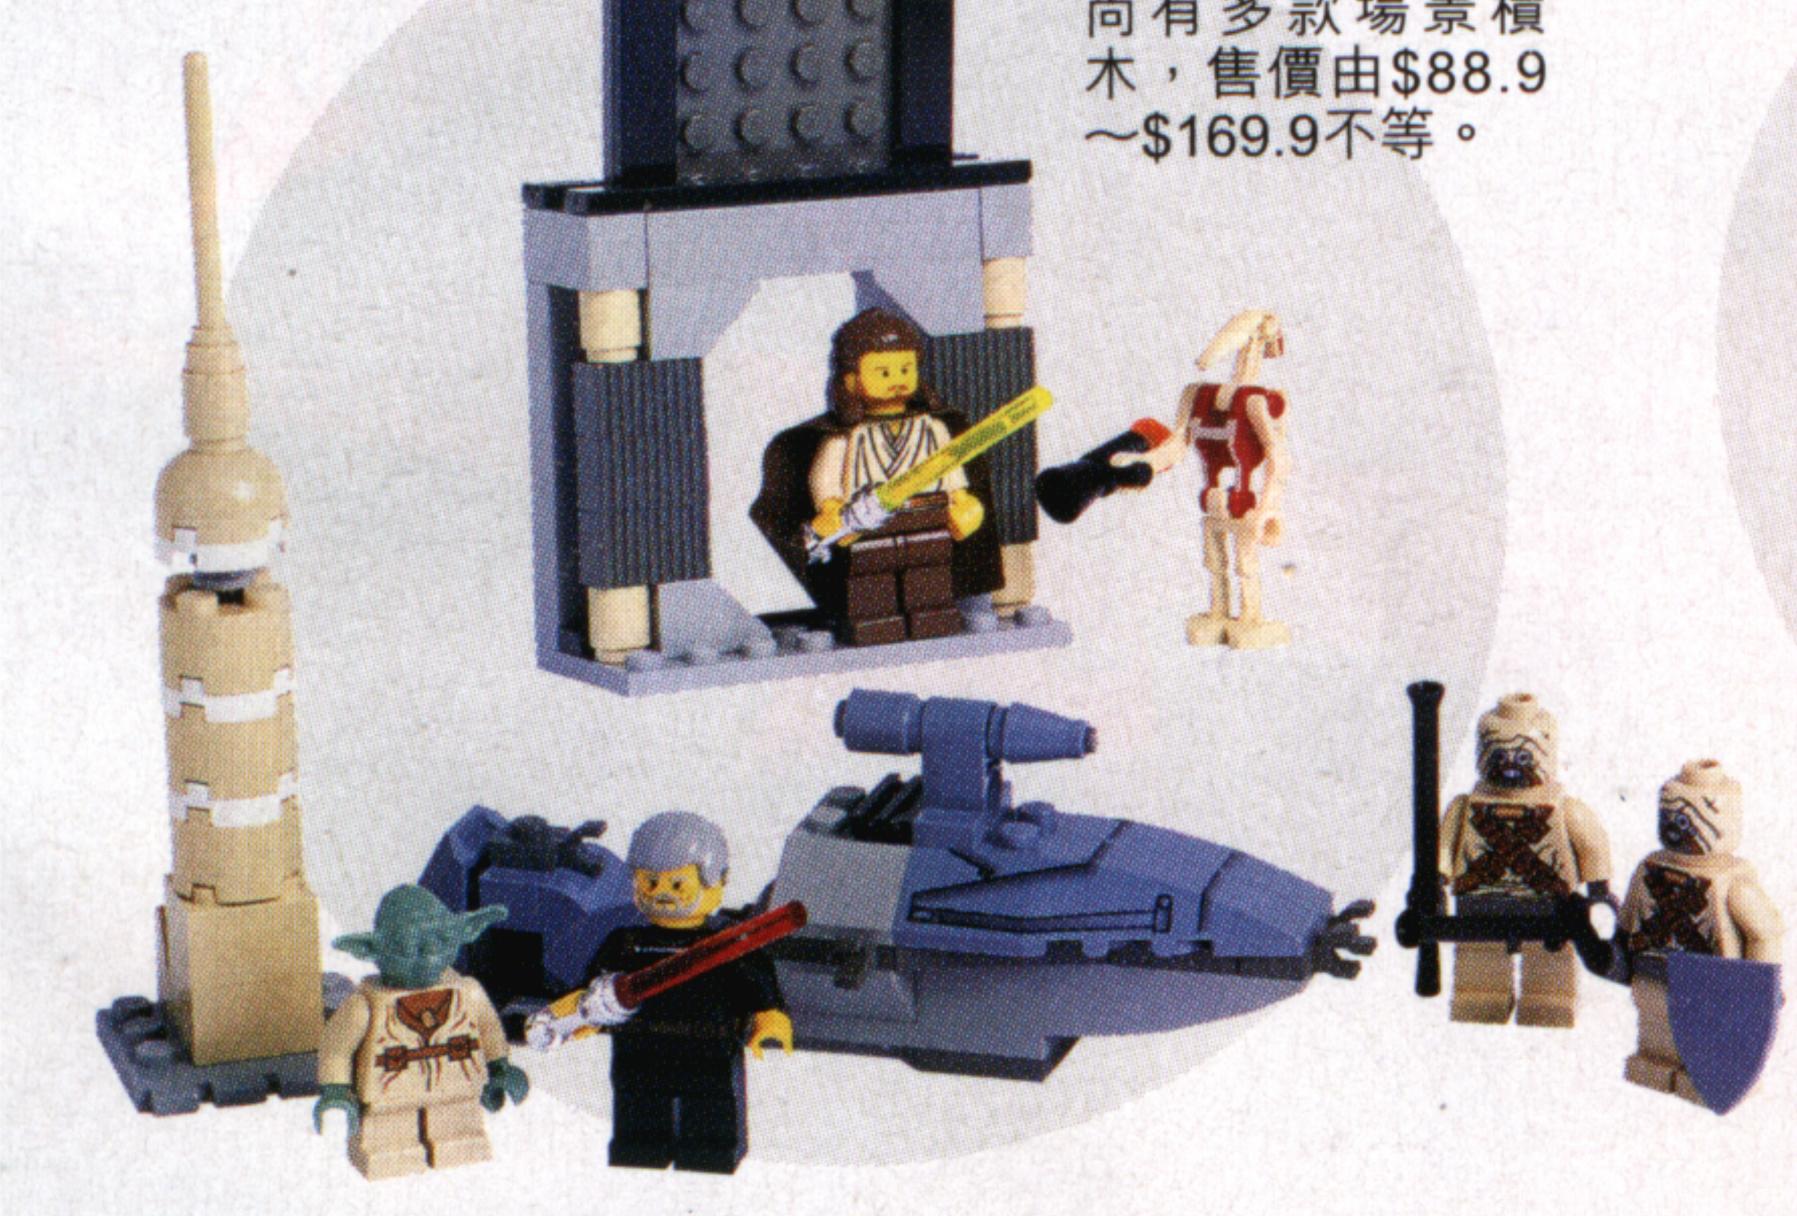 Attack of the Clones Yoda and Dooku LEGO set